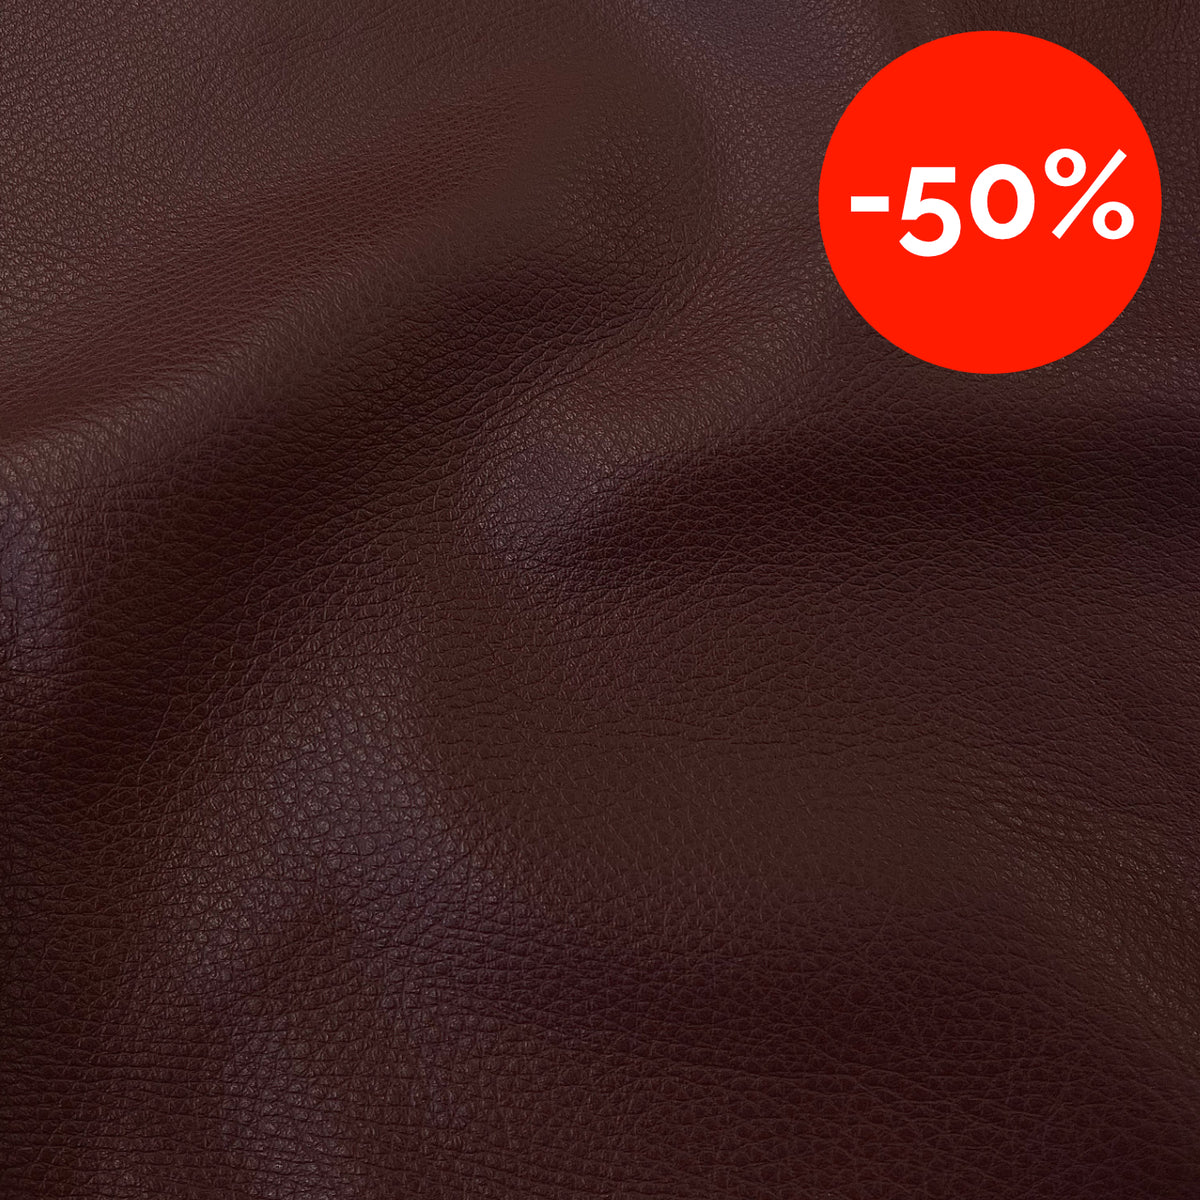 Orange Pebble Grainy Cowhide Leather, Dollaro Halfhides, Durable Italian  Leather for Upholstery, Leather Bagmaking and Crafting, DIY Leather